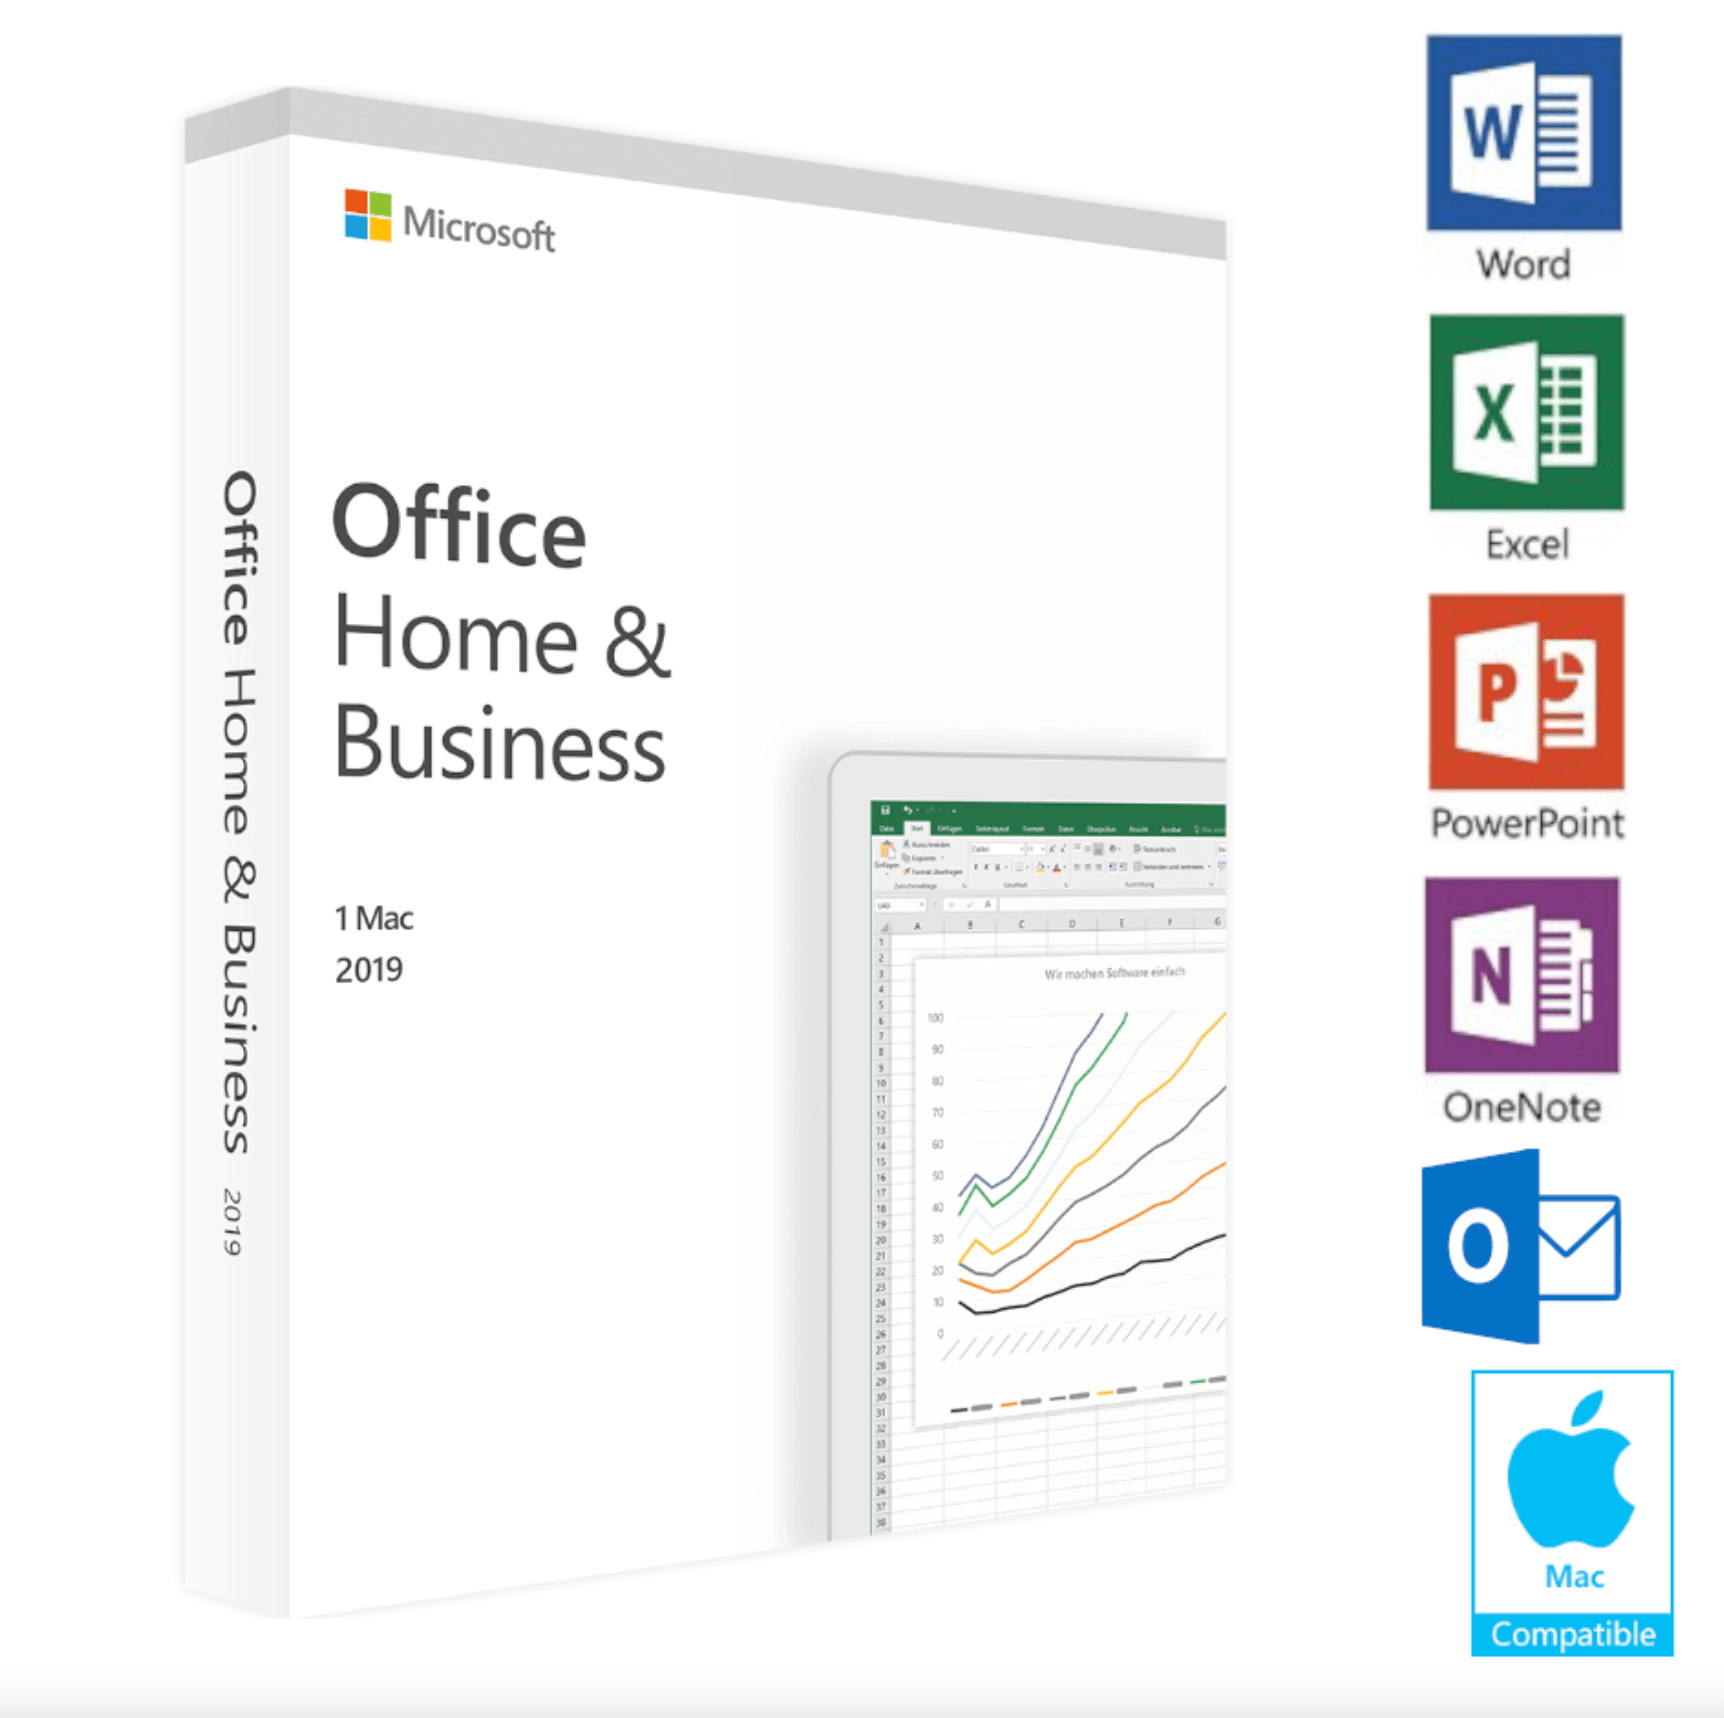 Office Home ＆ Business 2019